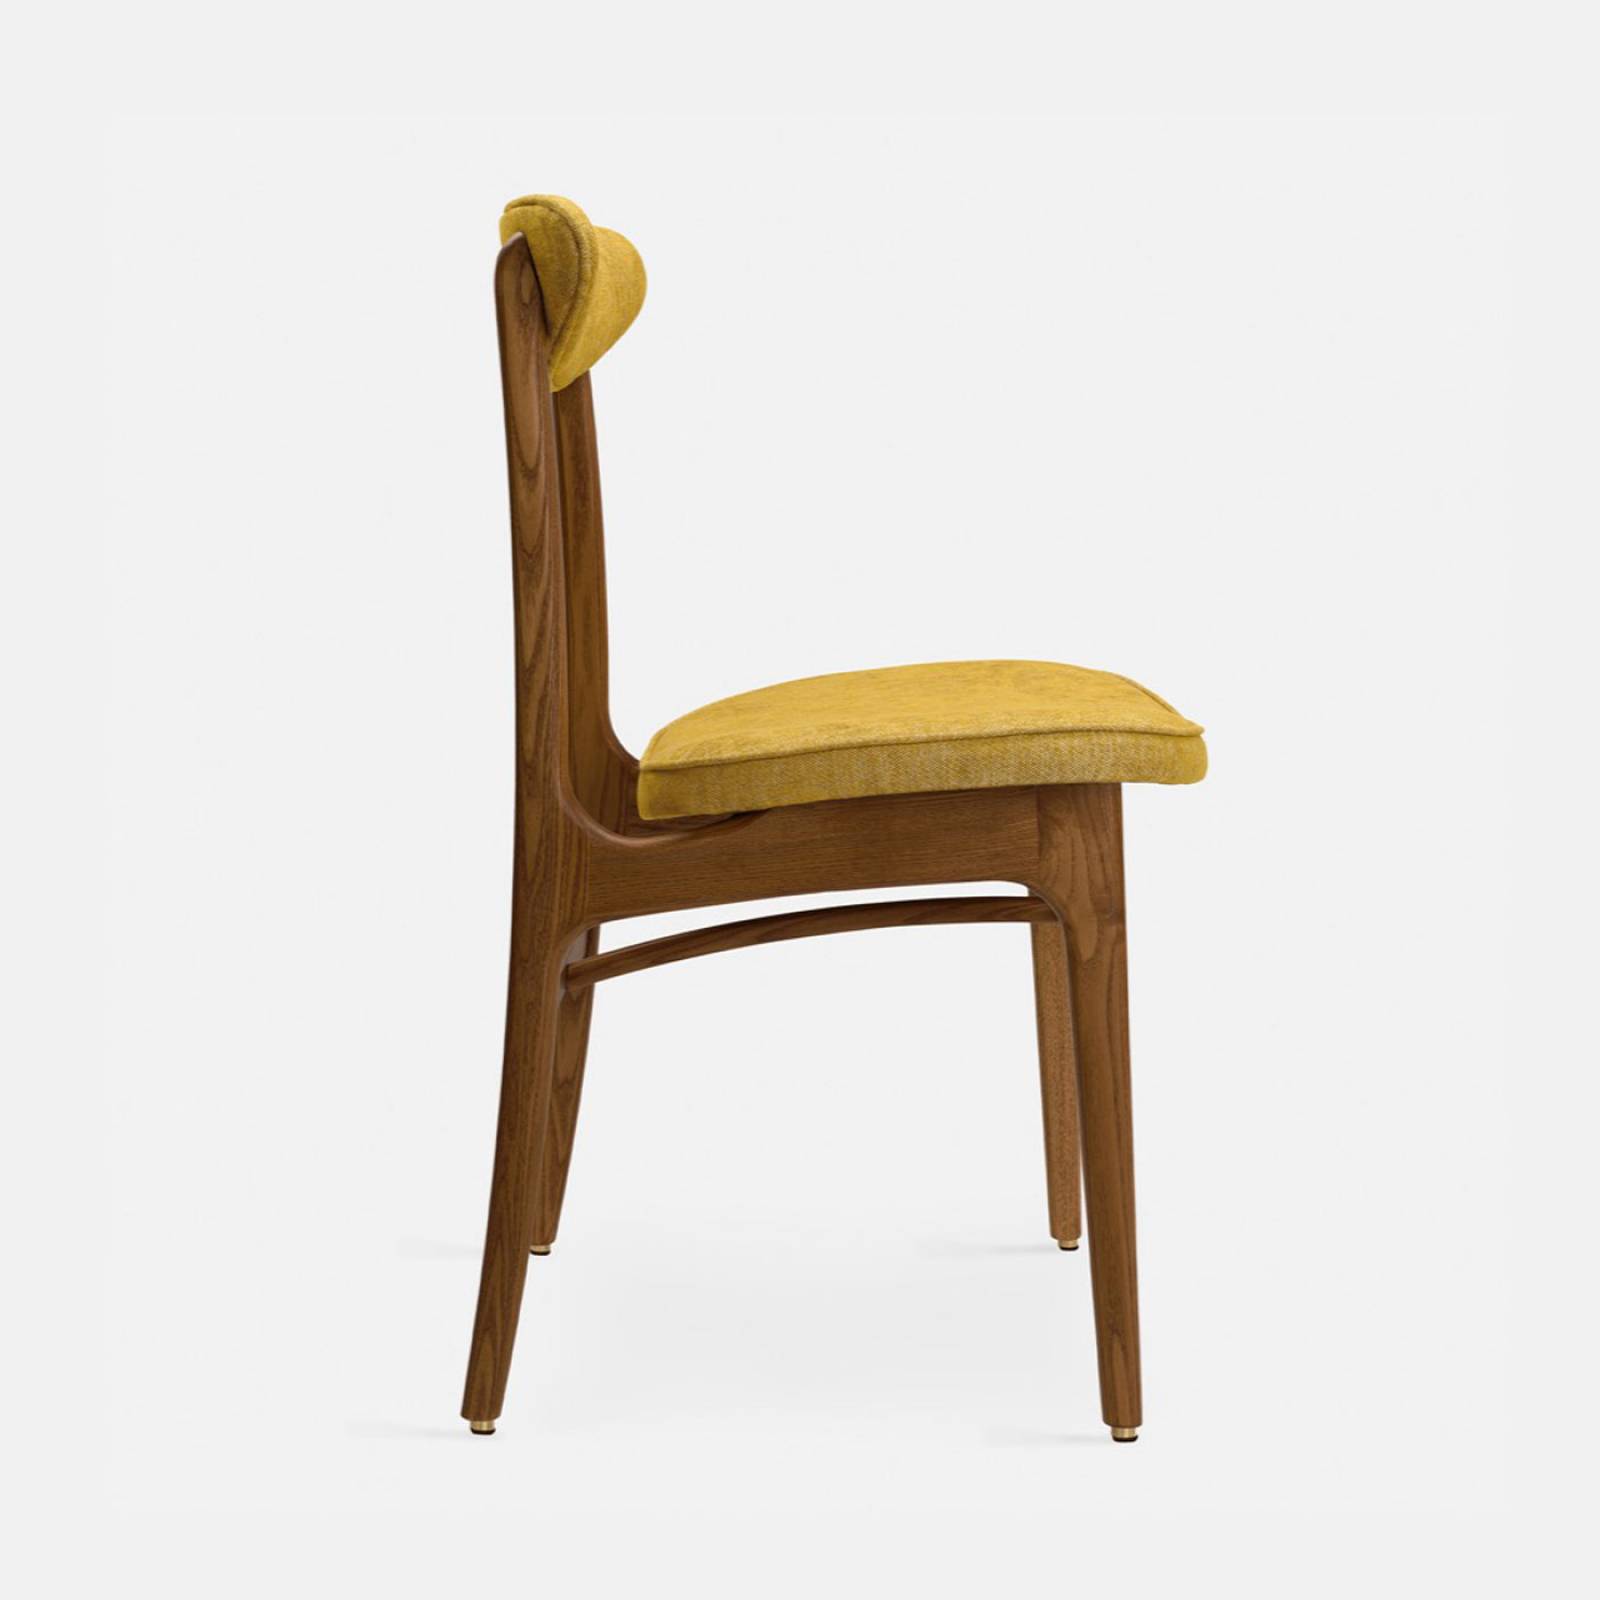 200-190 Chair - Fabric and Ash thumbnails